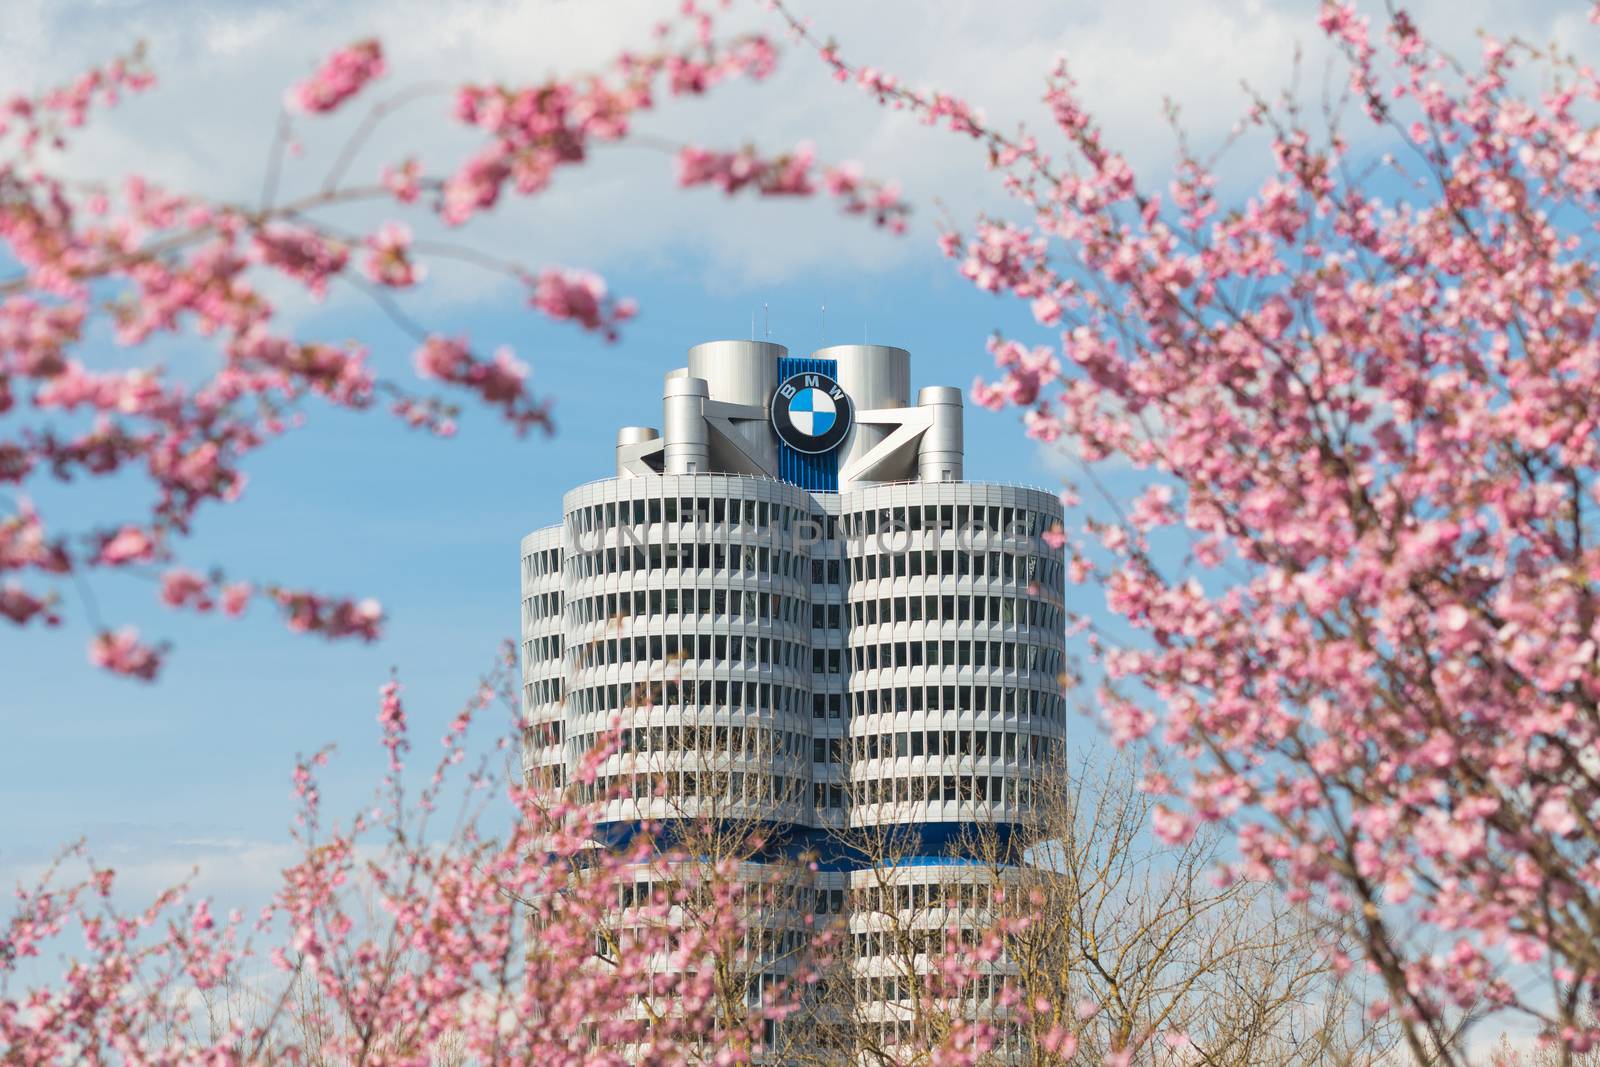 Munich, Germany - April 12, 2015: High rise tower building of BMW head office German car manufacturer framed by pink spring flowering tree branches.